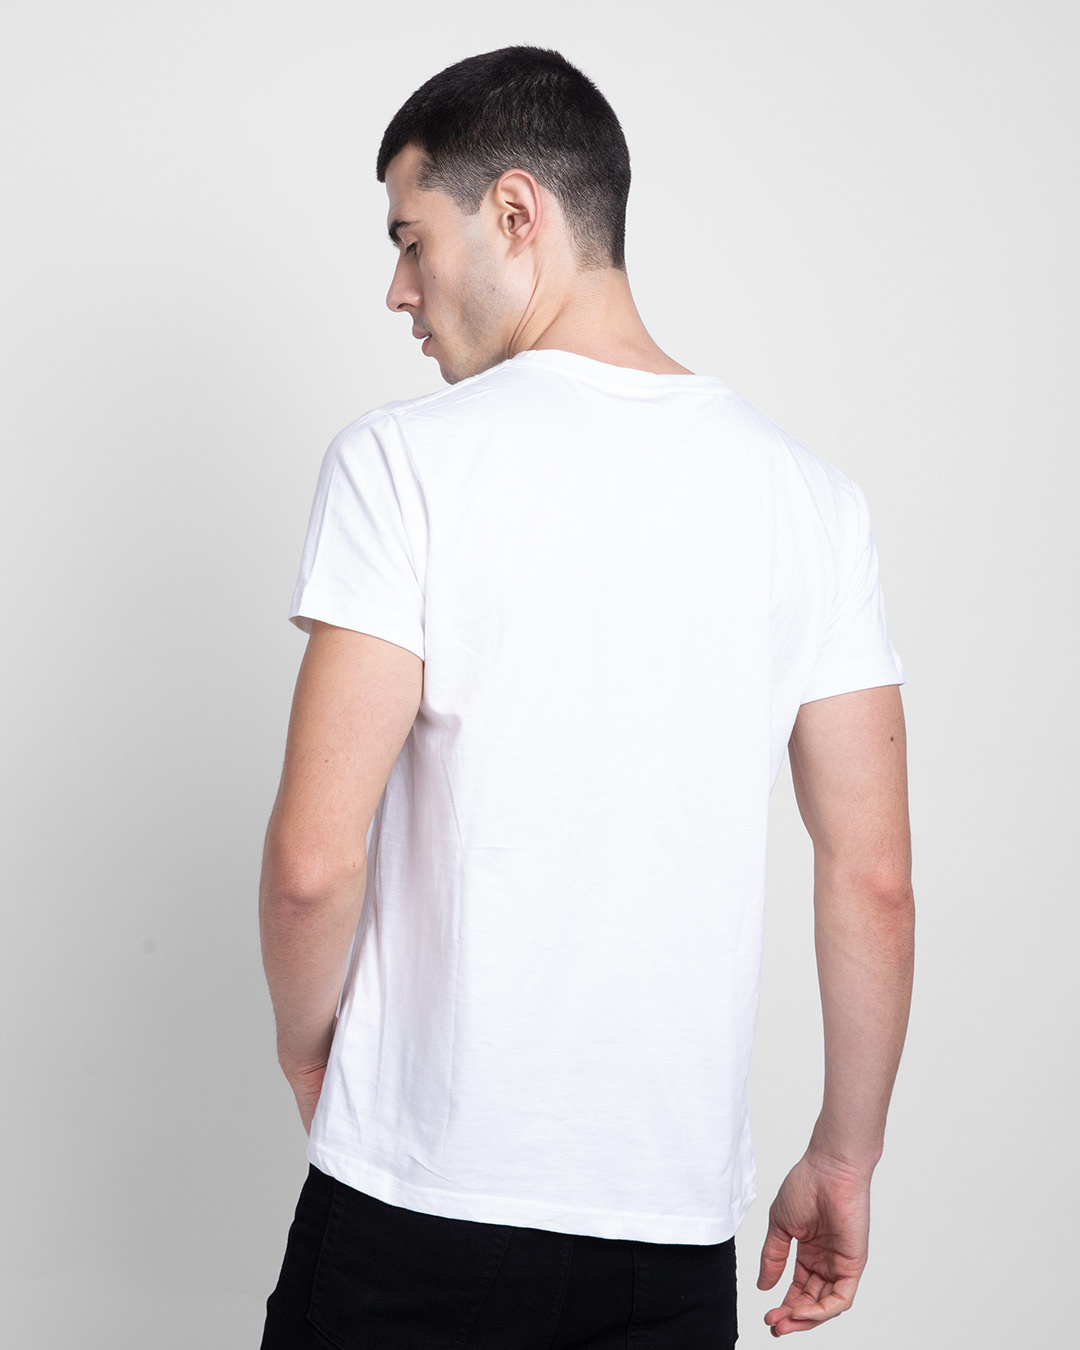 Shop Escape to outdoors Half Sleeve T-Shirt White-Back